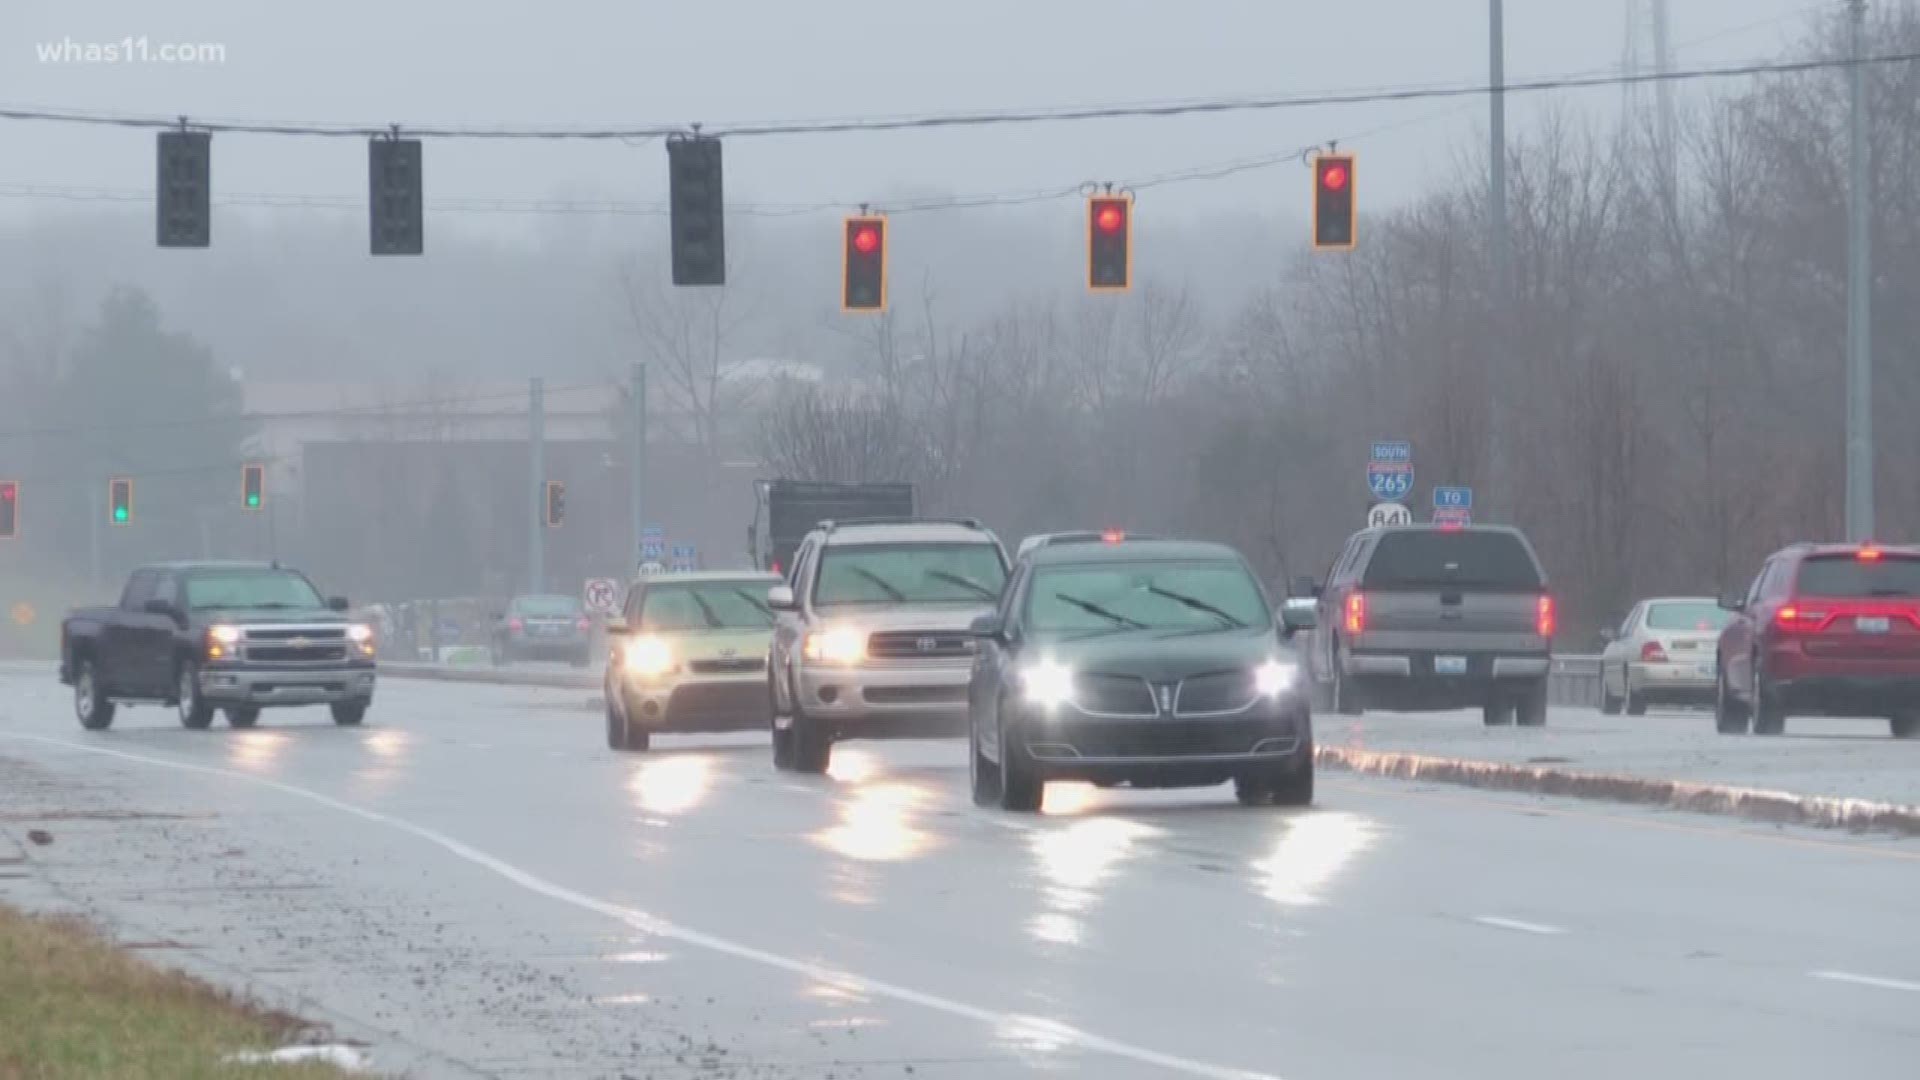 There have been more than 70 crashes at the intersection of Old Henry Road and the Snyder in just the past calendar year, and neighbors say it seems like there's a new crash every day.